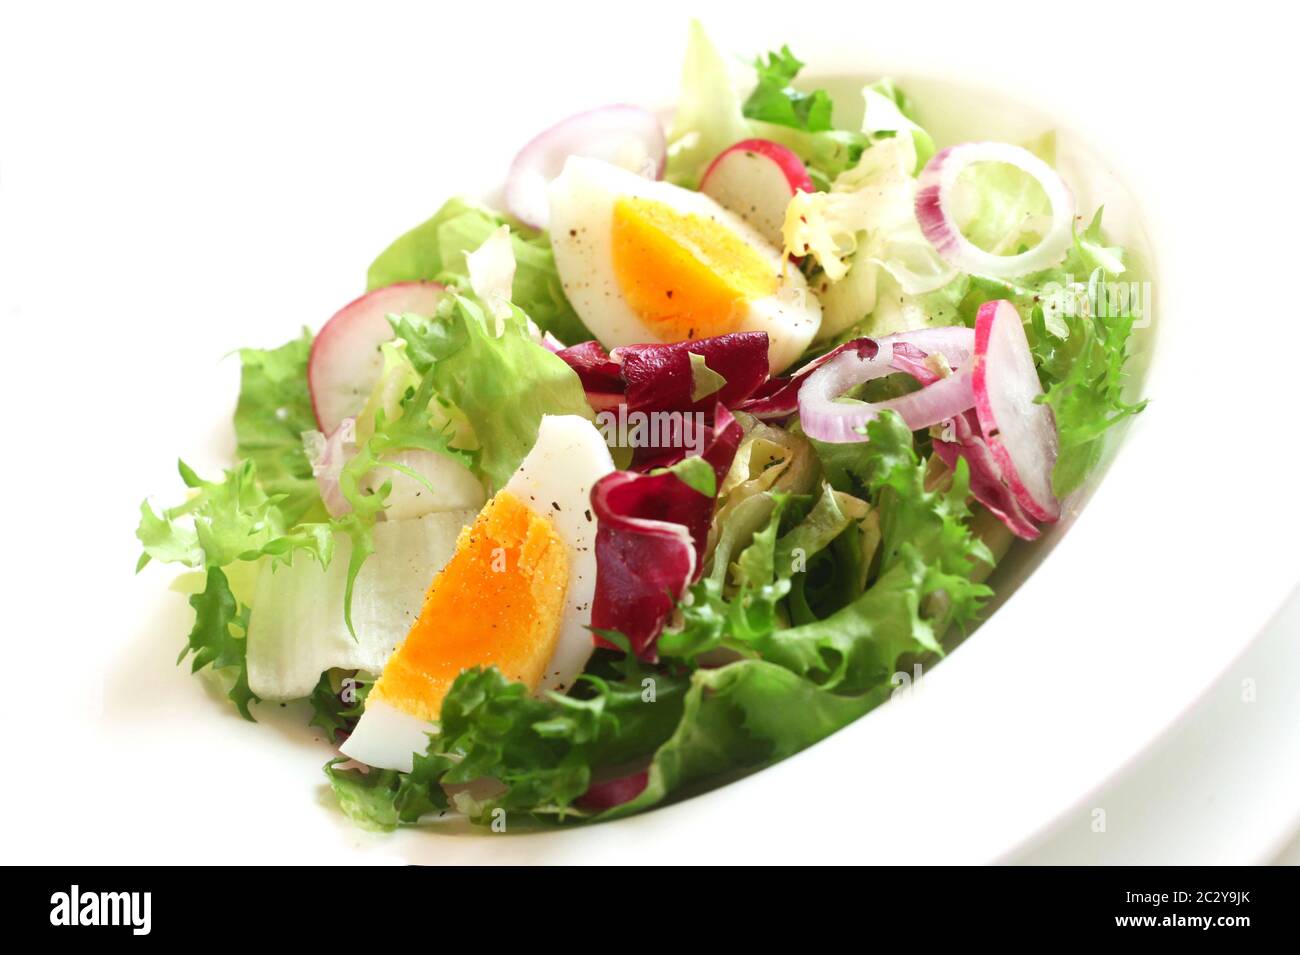 Salad With Egg Stock Photo